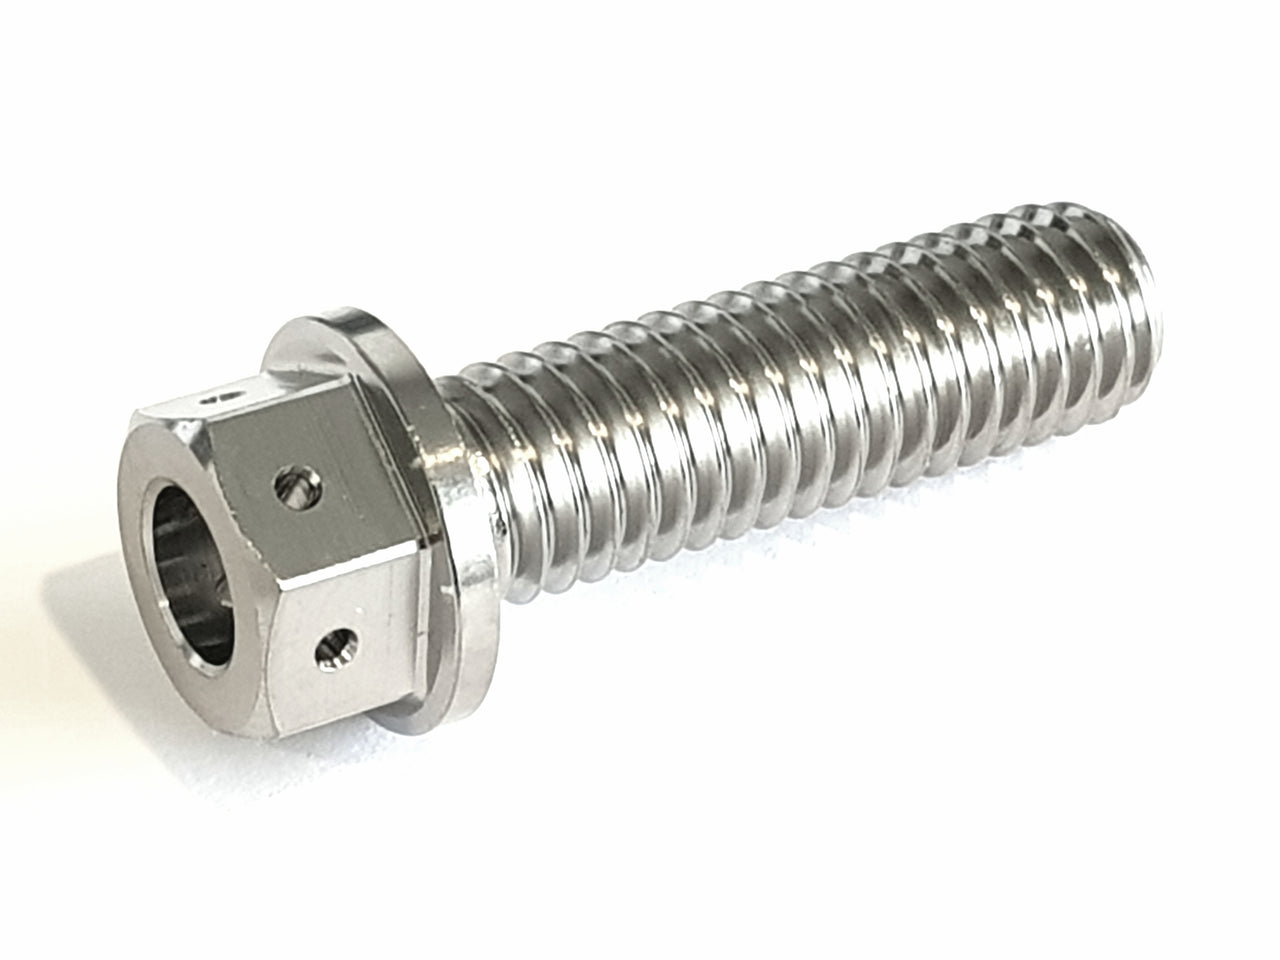 7/16 UNC 1.500" Reduced Hex bolt With Holes Drilled